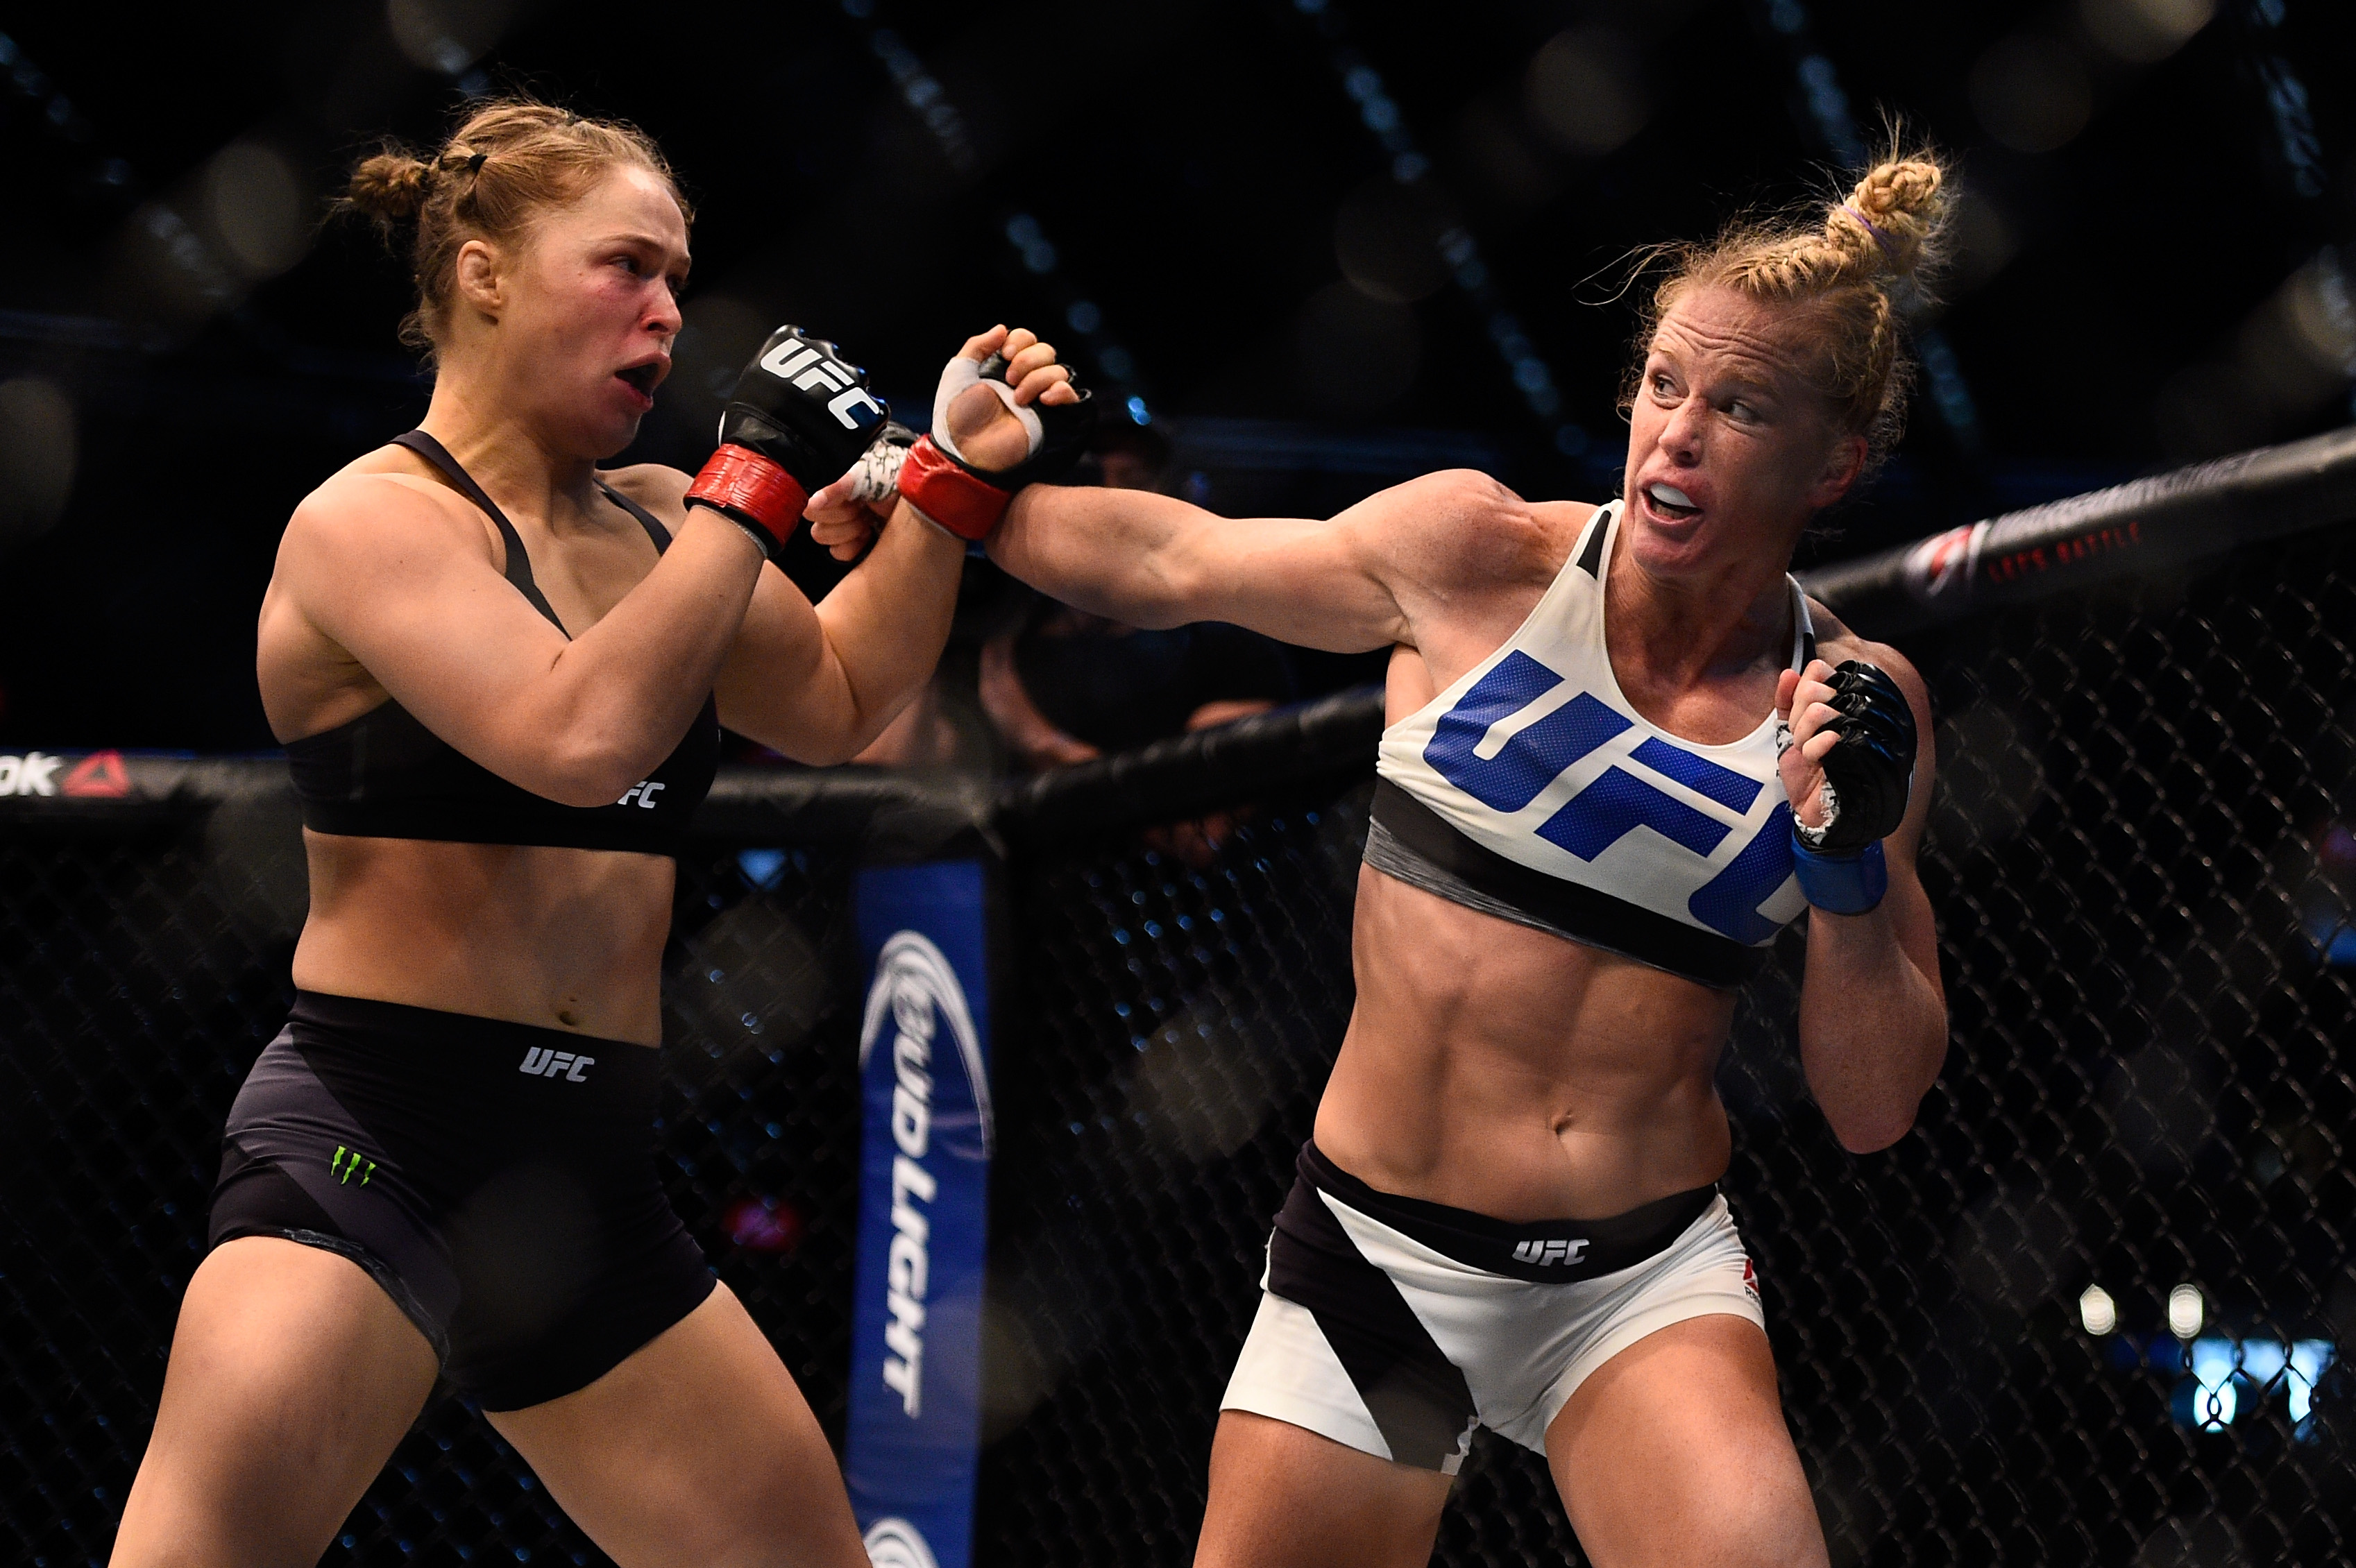 Ronda Rousey blocks a punch from Holly Holm in their UFC women's bantamweight championship bout during the UFC 193 event at Etihad Stadium on November 15, 2015 in Melbourne, Australia. (Jeff Bottari—Zuffa LLC/Getty Images)